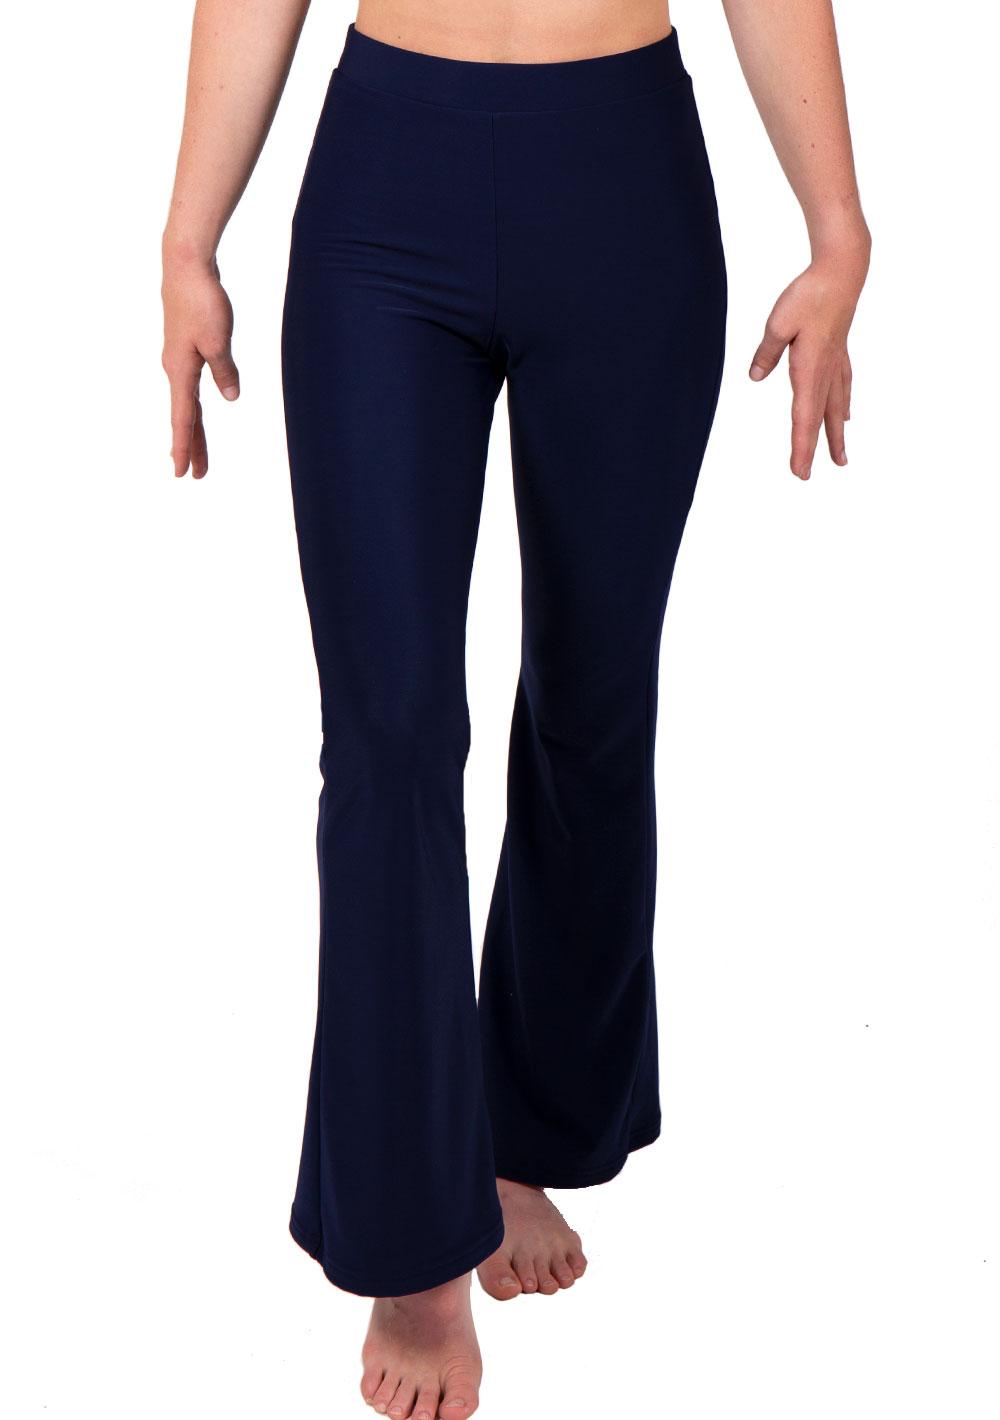 tracksuit pants for ladies